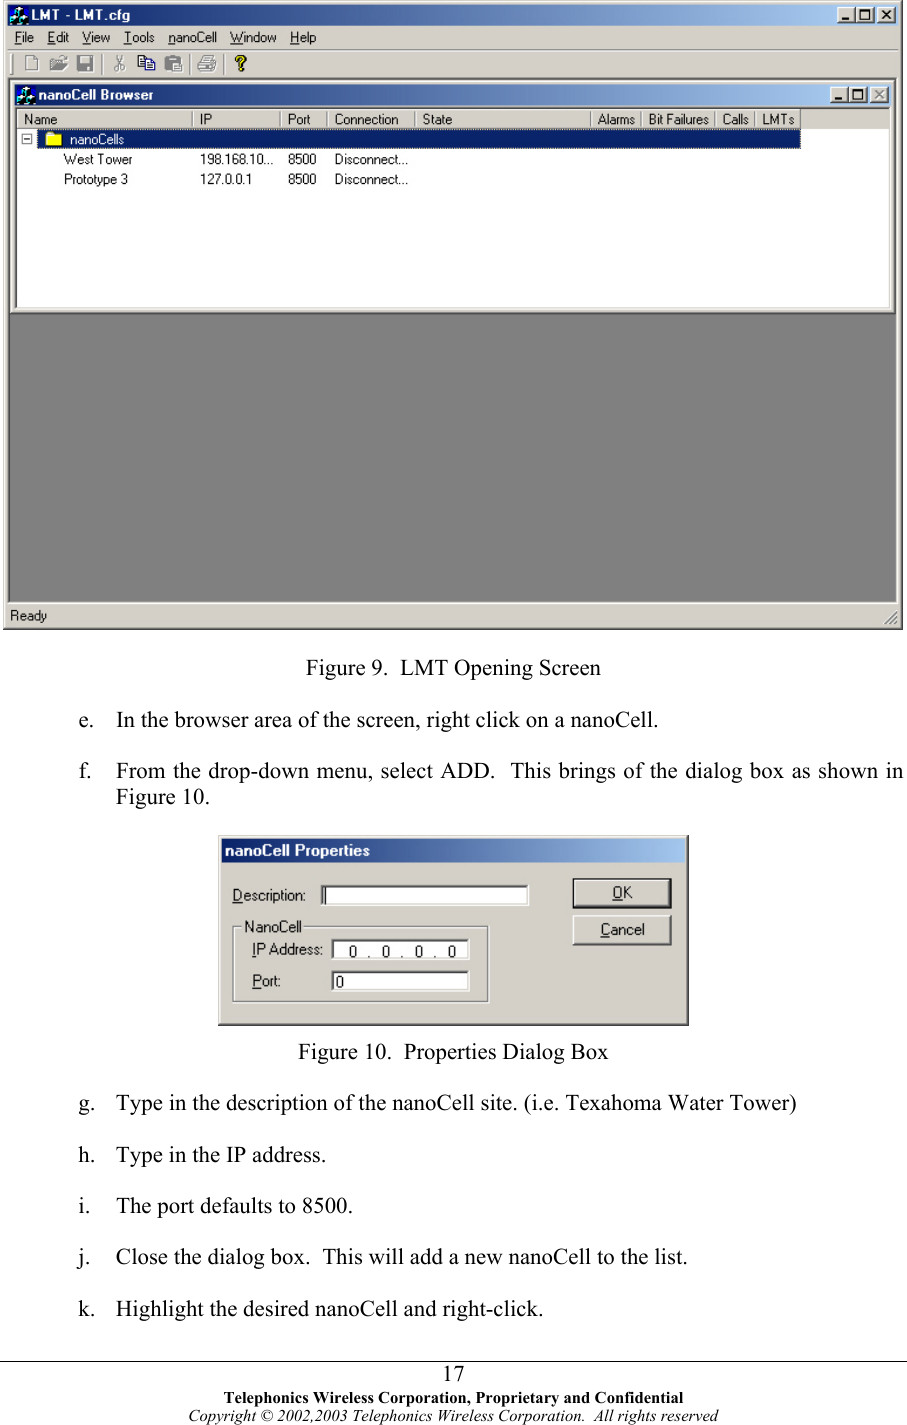   Figure 9.  LMT Opening Screen e. f. In the browser area of the screen, right click on a nanoCell. From the drop-down menu, select ADD.  This brings of the dialog box as shown in Figure 10.  Figure 10.  Properties Dialog Box g. h. i. j. k. Type in the description of the nanoCell site. (i.e. Texahoma Water Tower) Type in the IP address. The port defaults to 8500. Close the dialog box.  This will add a new nanoCell to the list. Highlight the desired nanoCell and right-click.  Telephonics Wireless Corporation, Proprietary and Confidential Copyright © 2002,2003 Telephonics Wireless Corporation.  All rights reserved 17